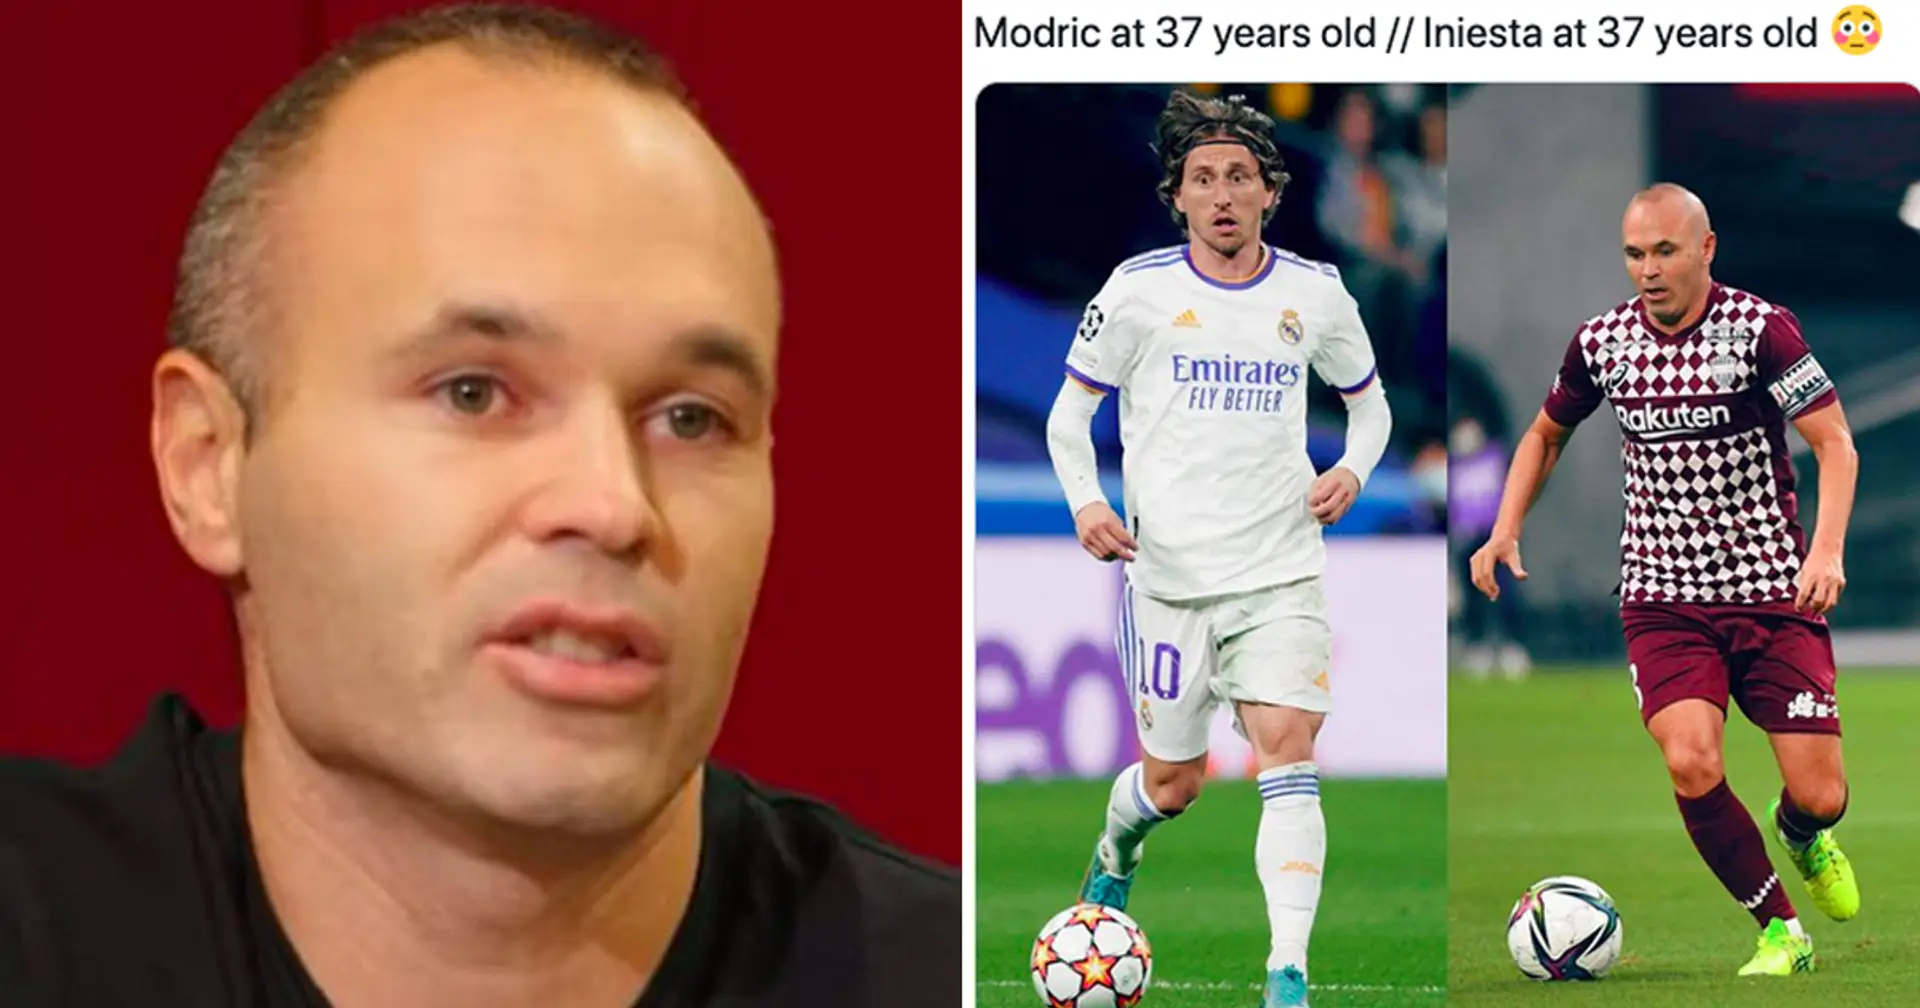 Fan account trolls Iniesta for not being as good as Modric at 37 – Barca fans hit back